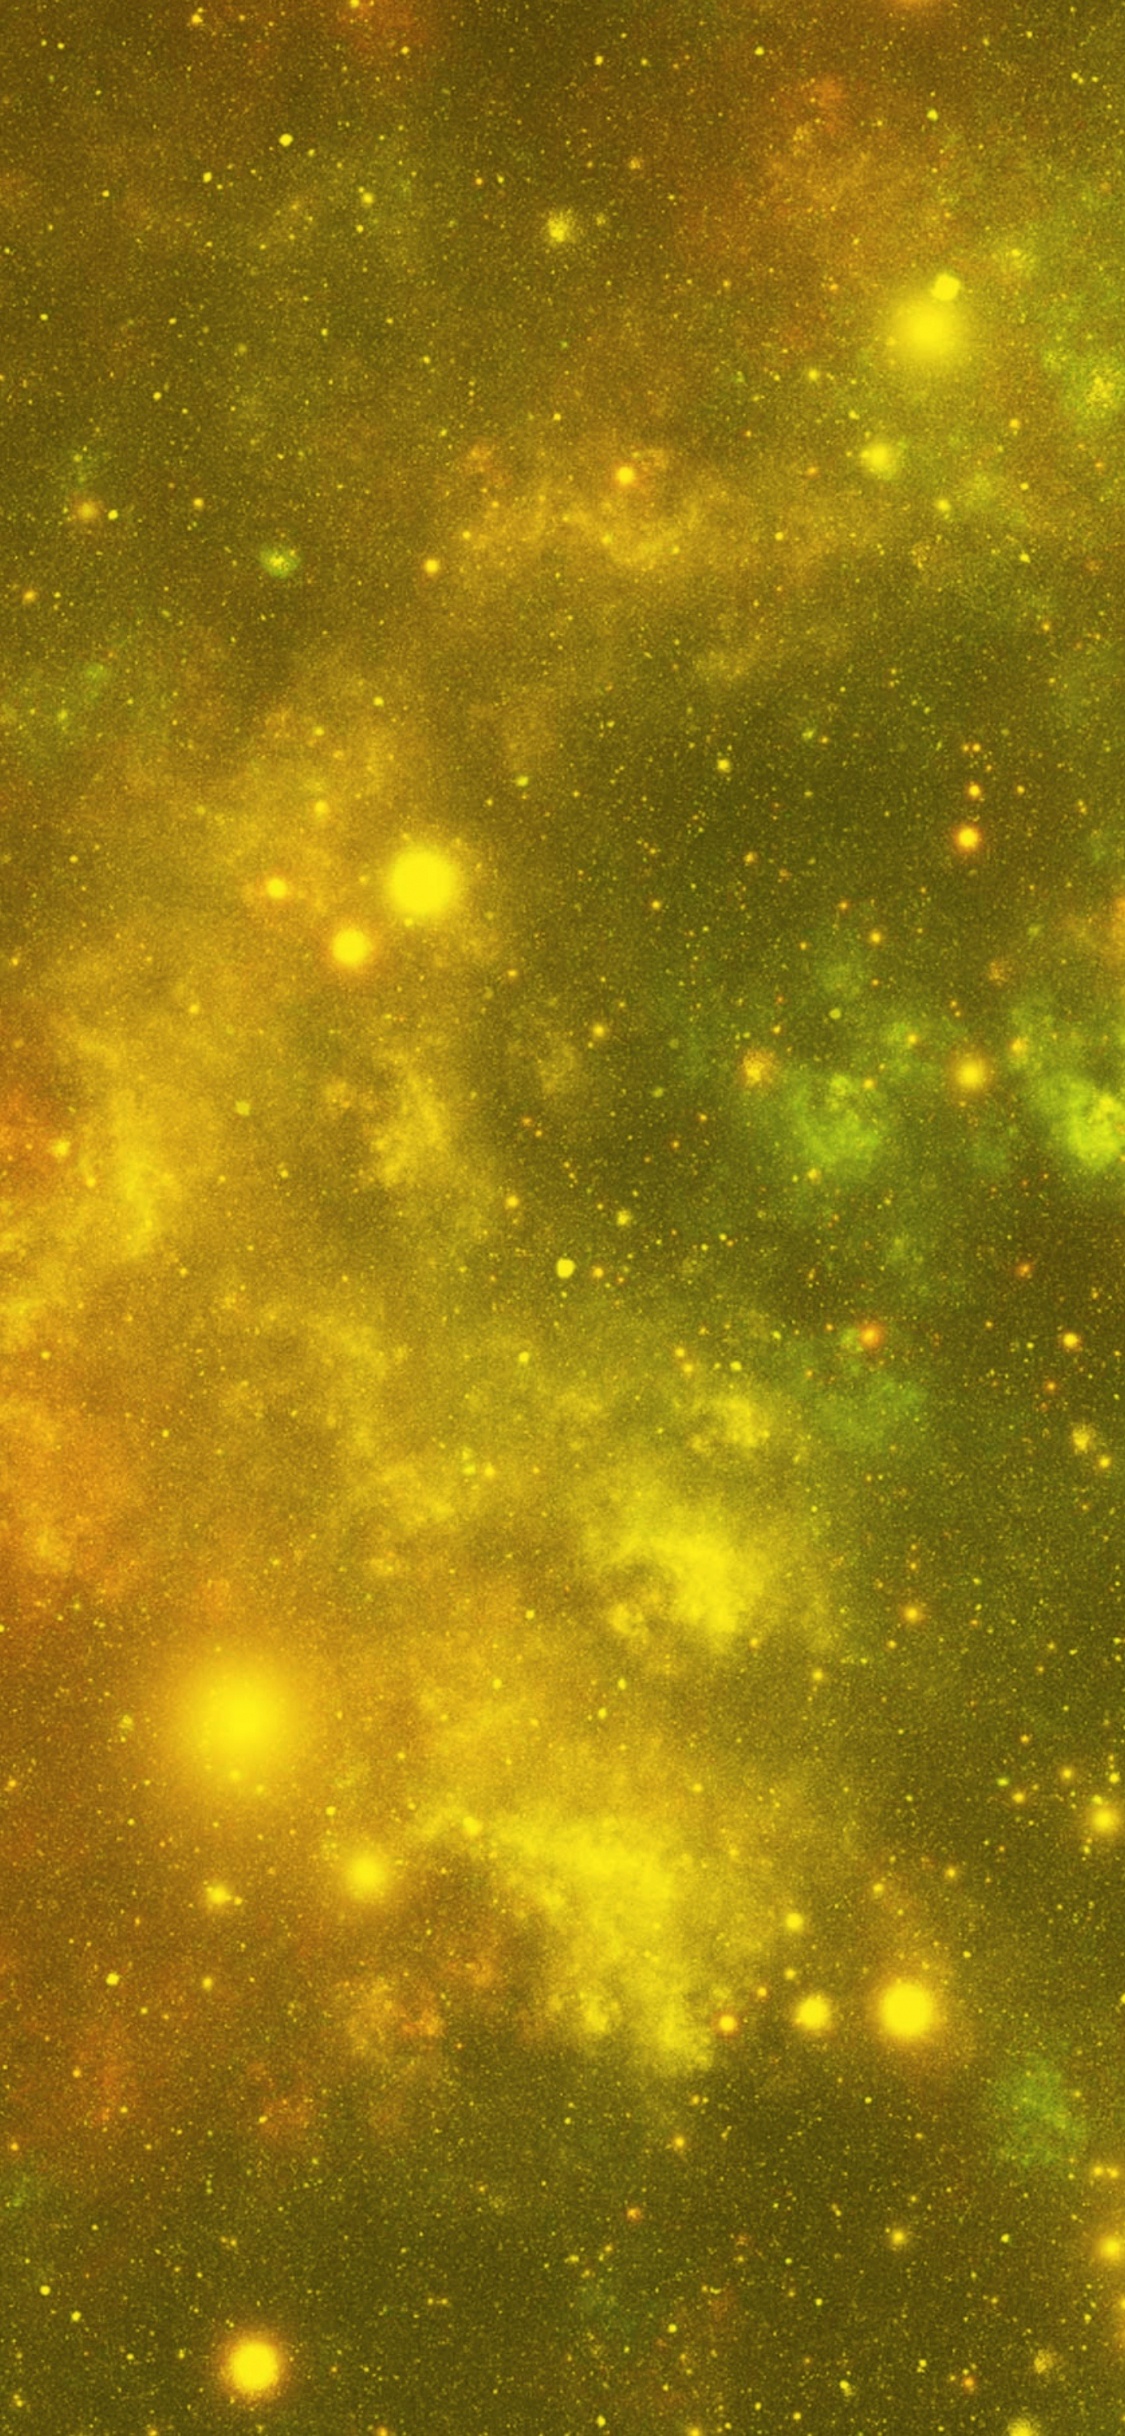 Green and Yellow Stars in The Sky. Wallpaper in 1125x2436 Resolution